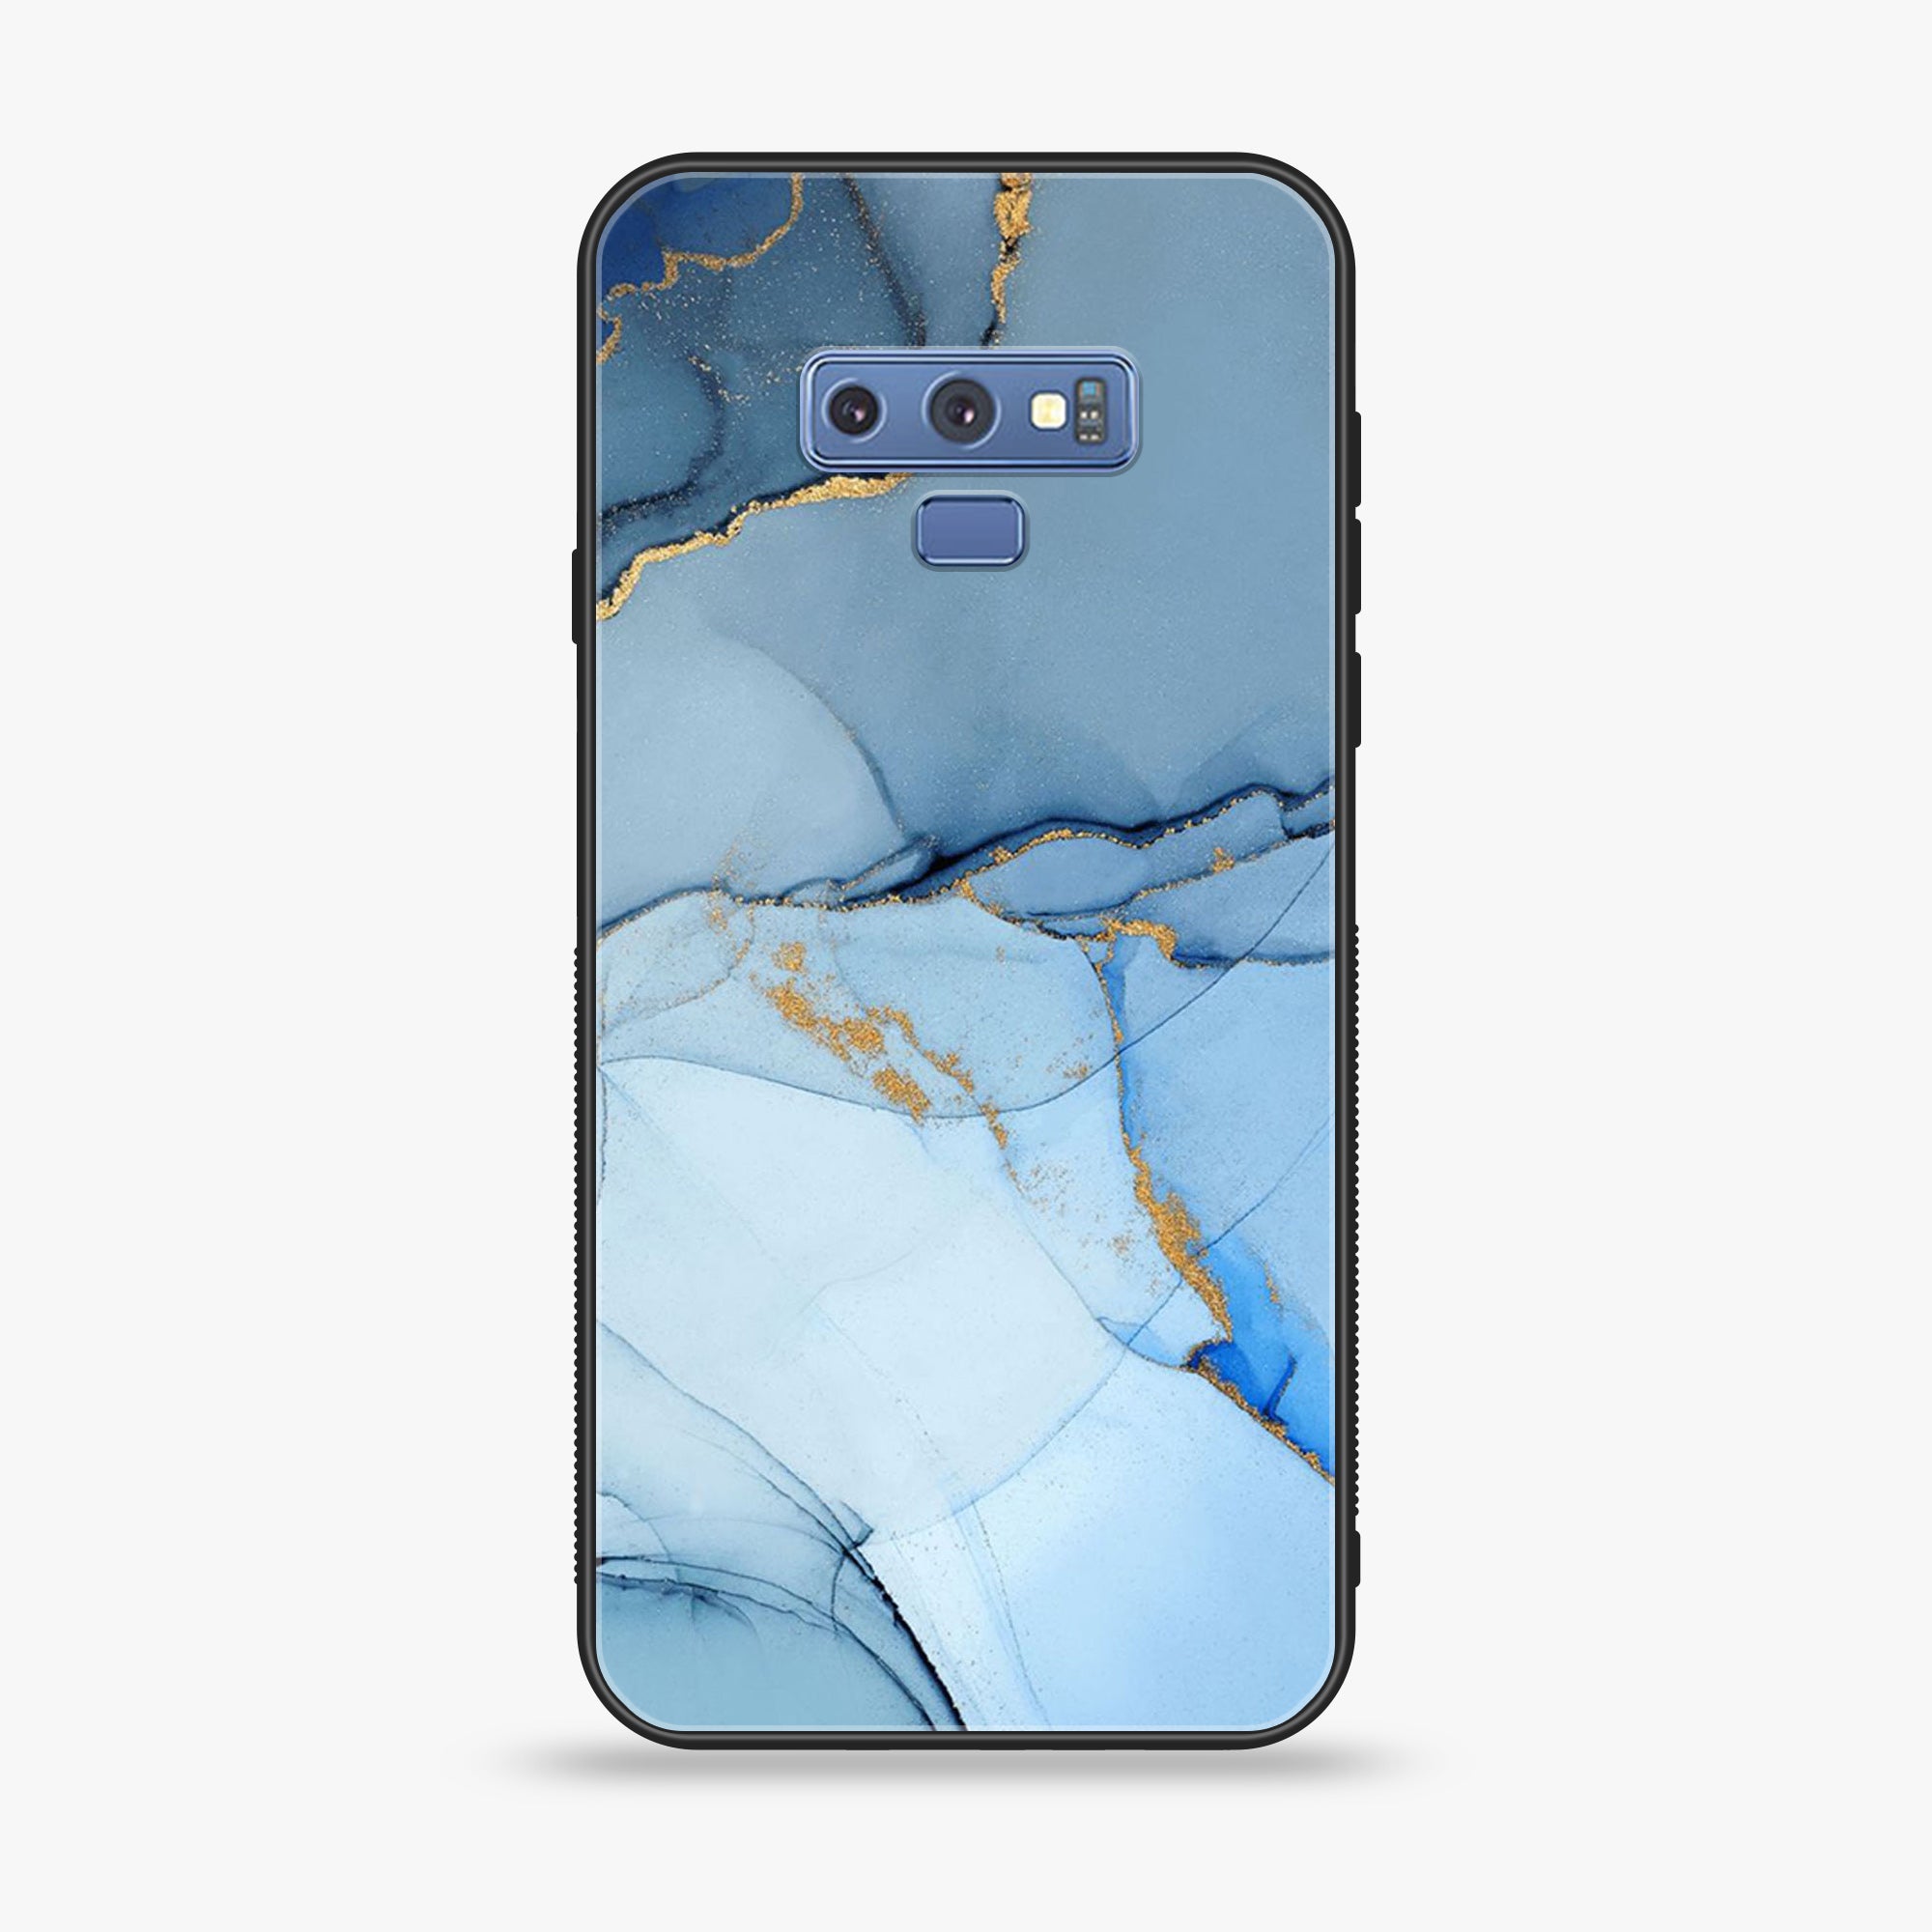 Samsung Galaxy Note 9 - Blue Marble Series - Premium Printed Glass soft Bumper shock Proof Case